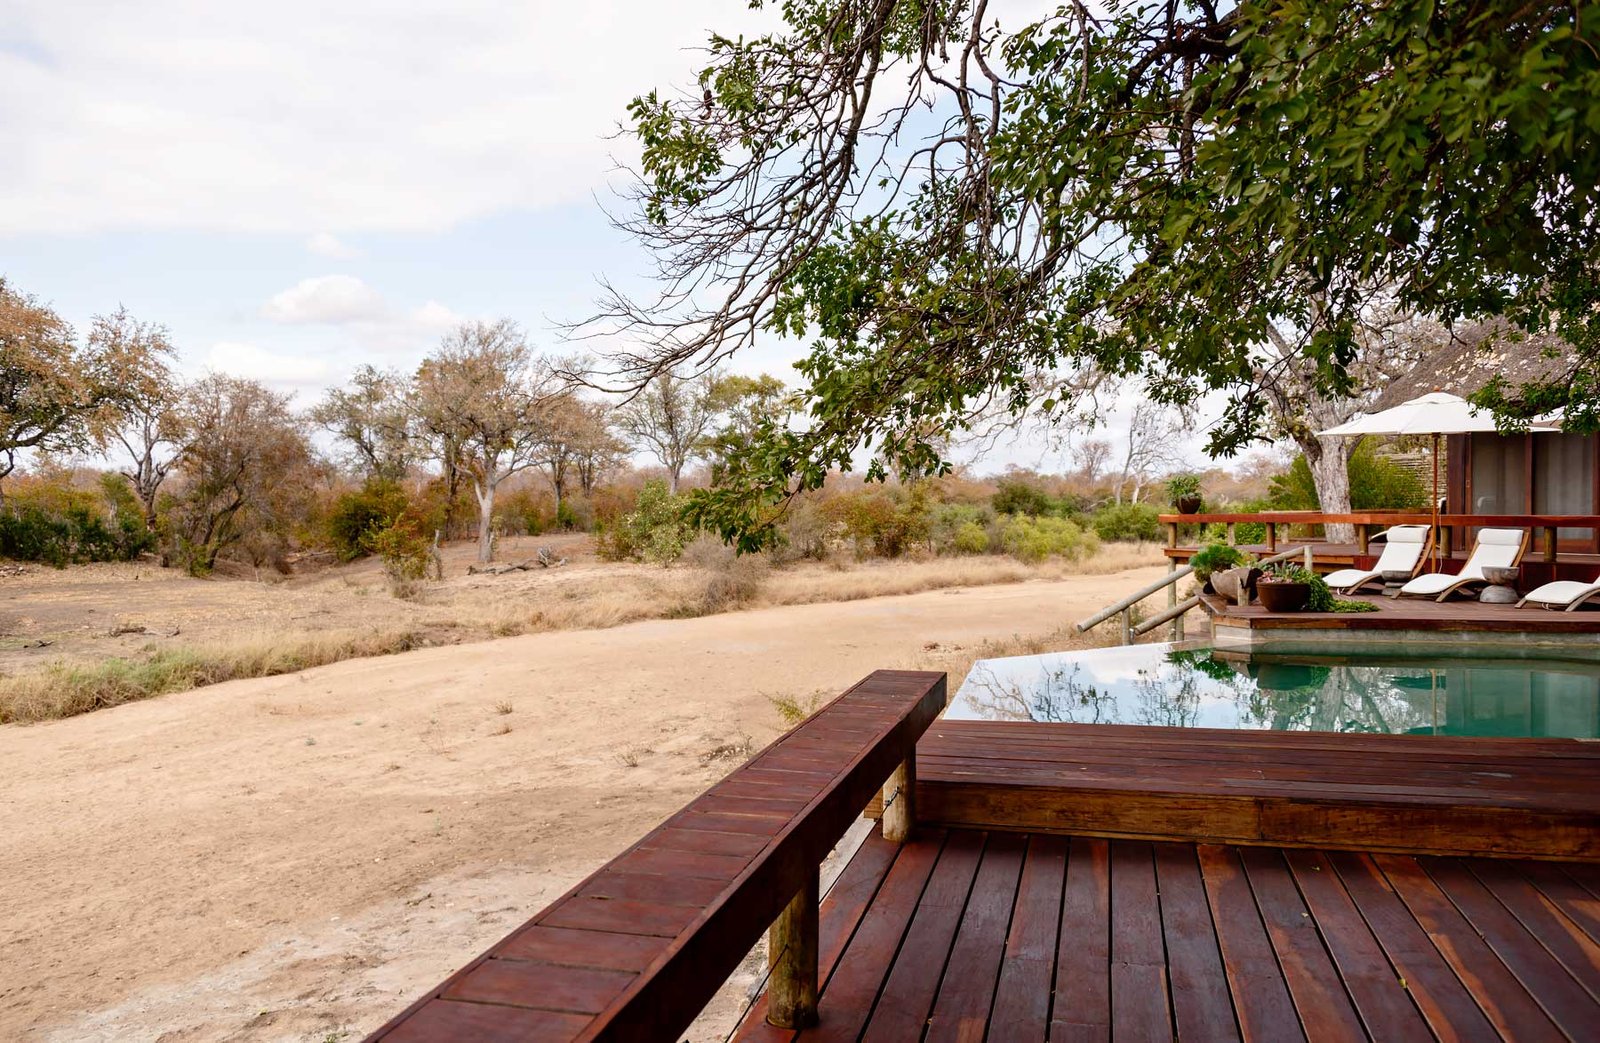 Swimming pool overlooking the dry river at Klaserie Sands River Camp - - Check out my review of staying at Klaserie Sands River Camp, a beautiful boutique (4 suites), luxury safari lodge in Greater Kruger (Big 5), South Africa